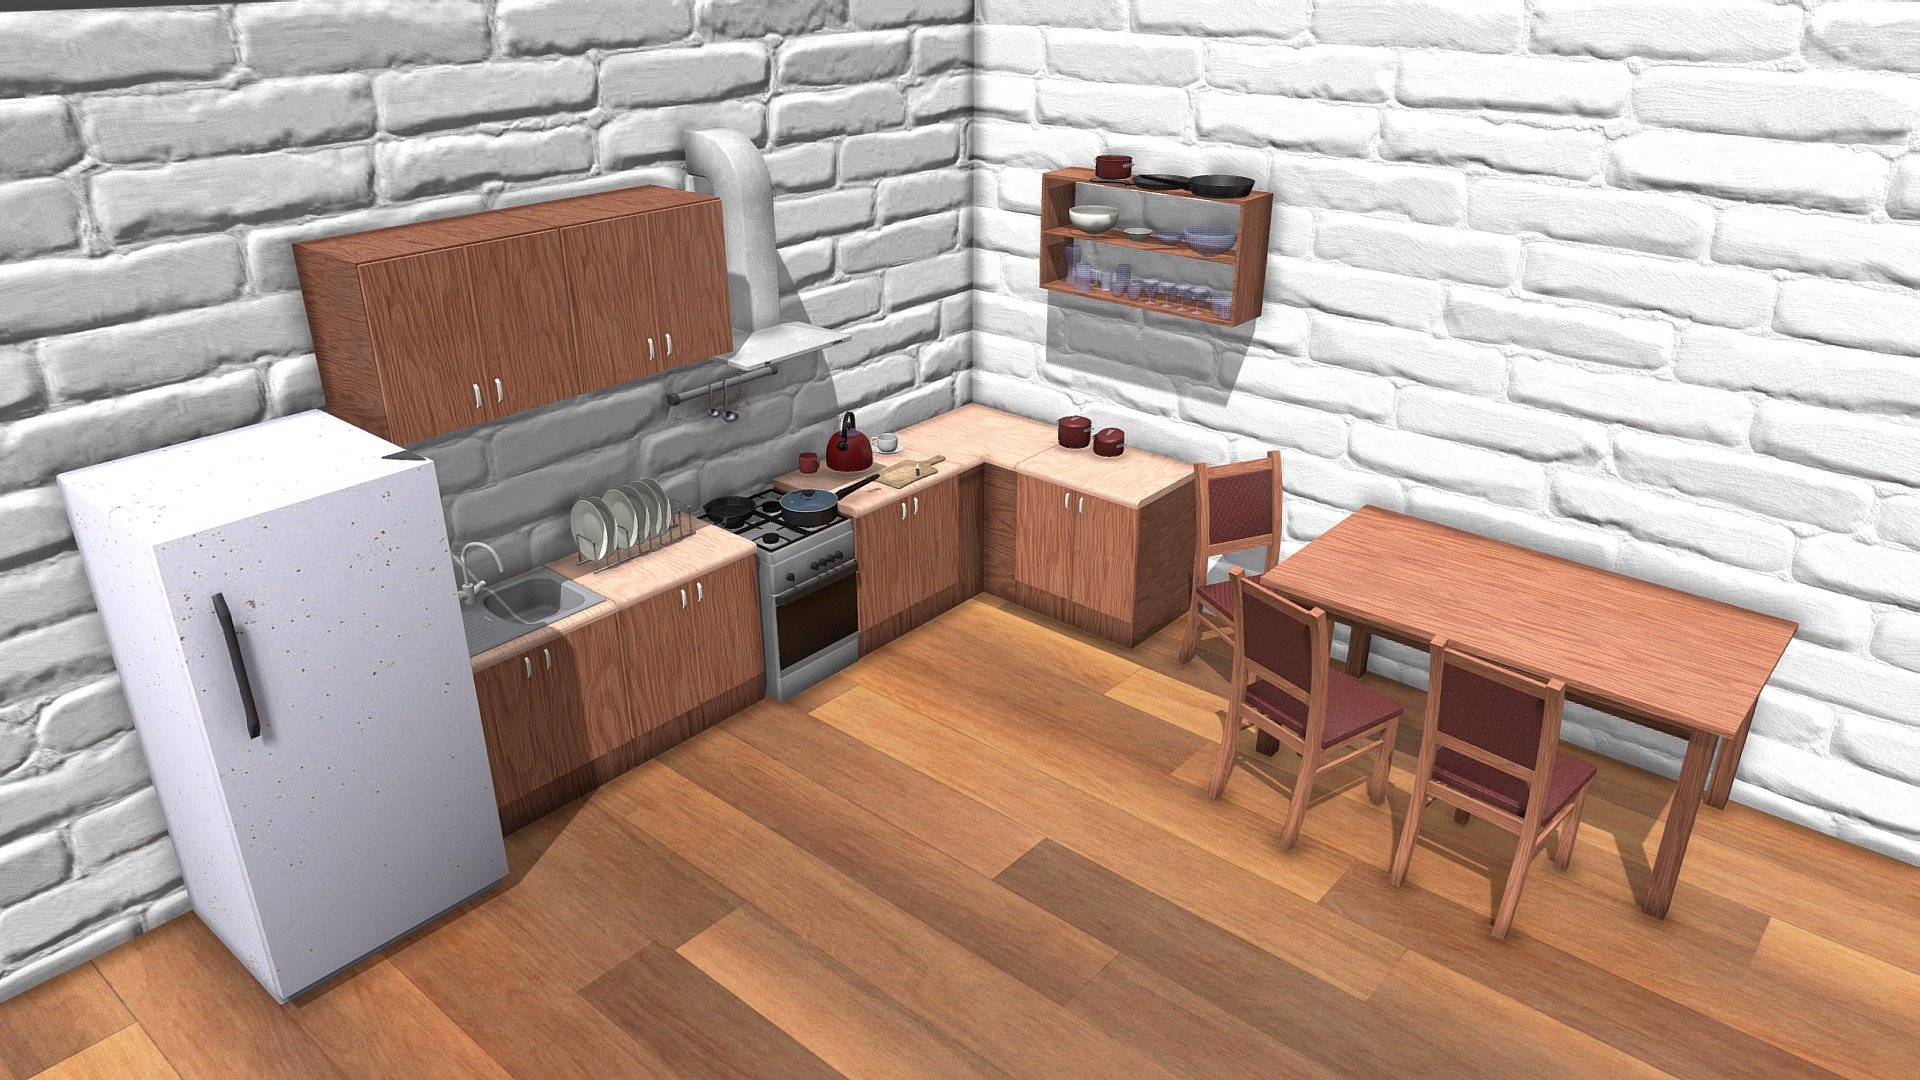 Package includes 37 Low-Poly models of kitchen stuff that you can use in your project.

Models are around 1K Verts and 2K Tris

Textures: 1024x1024 Albedo, Metallic and Normal maps.

Additional file contains:

* .FBX

* .3DS

* .BLEND

* .DAE

* .OBJ

* .STL

* Furniture Textures

* Kitchenware Textures
 - Kitchen Scene - Kitchen Pack v2 - Buy Royalty Free 3D model by TessaraOxygen (@19vladis97) 3d model